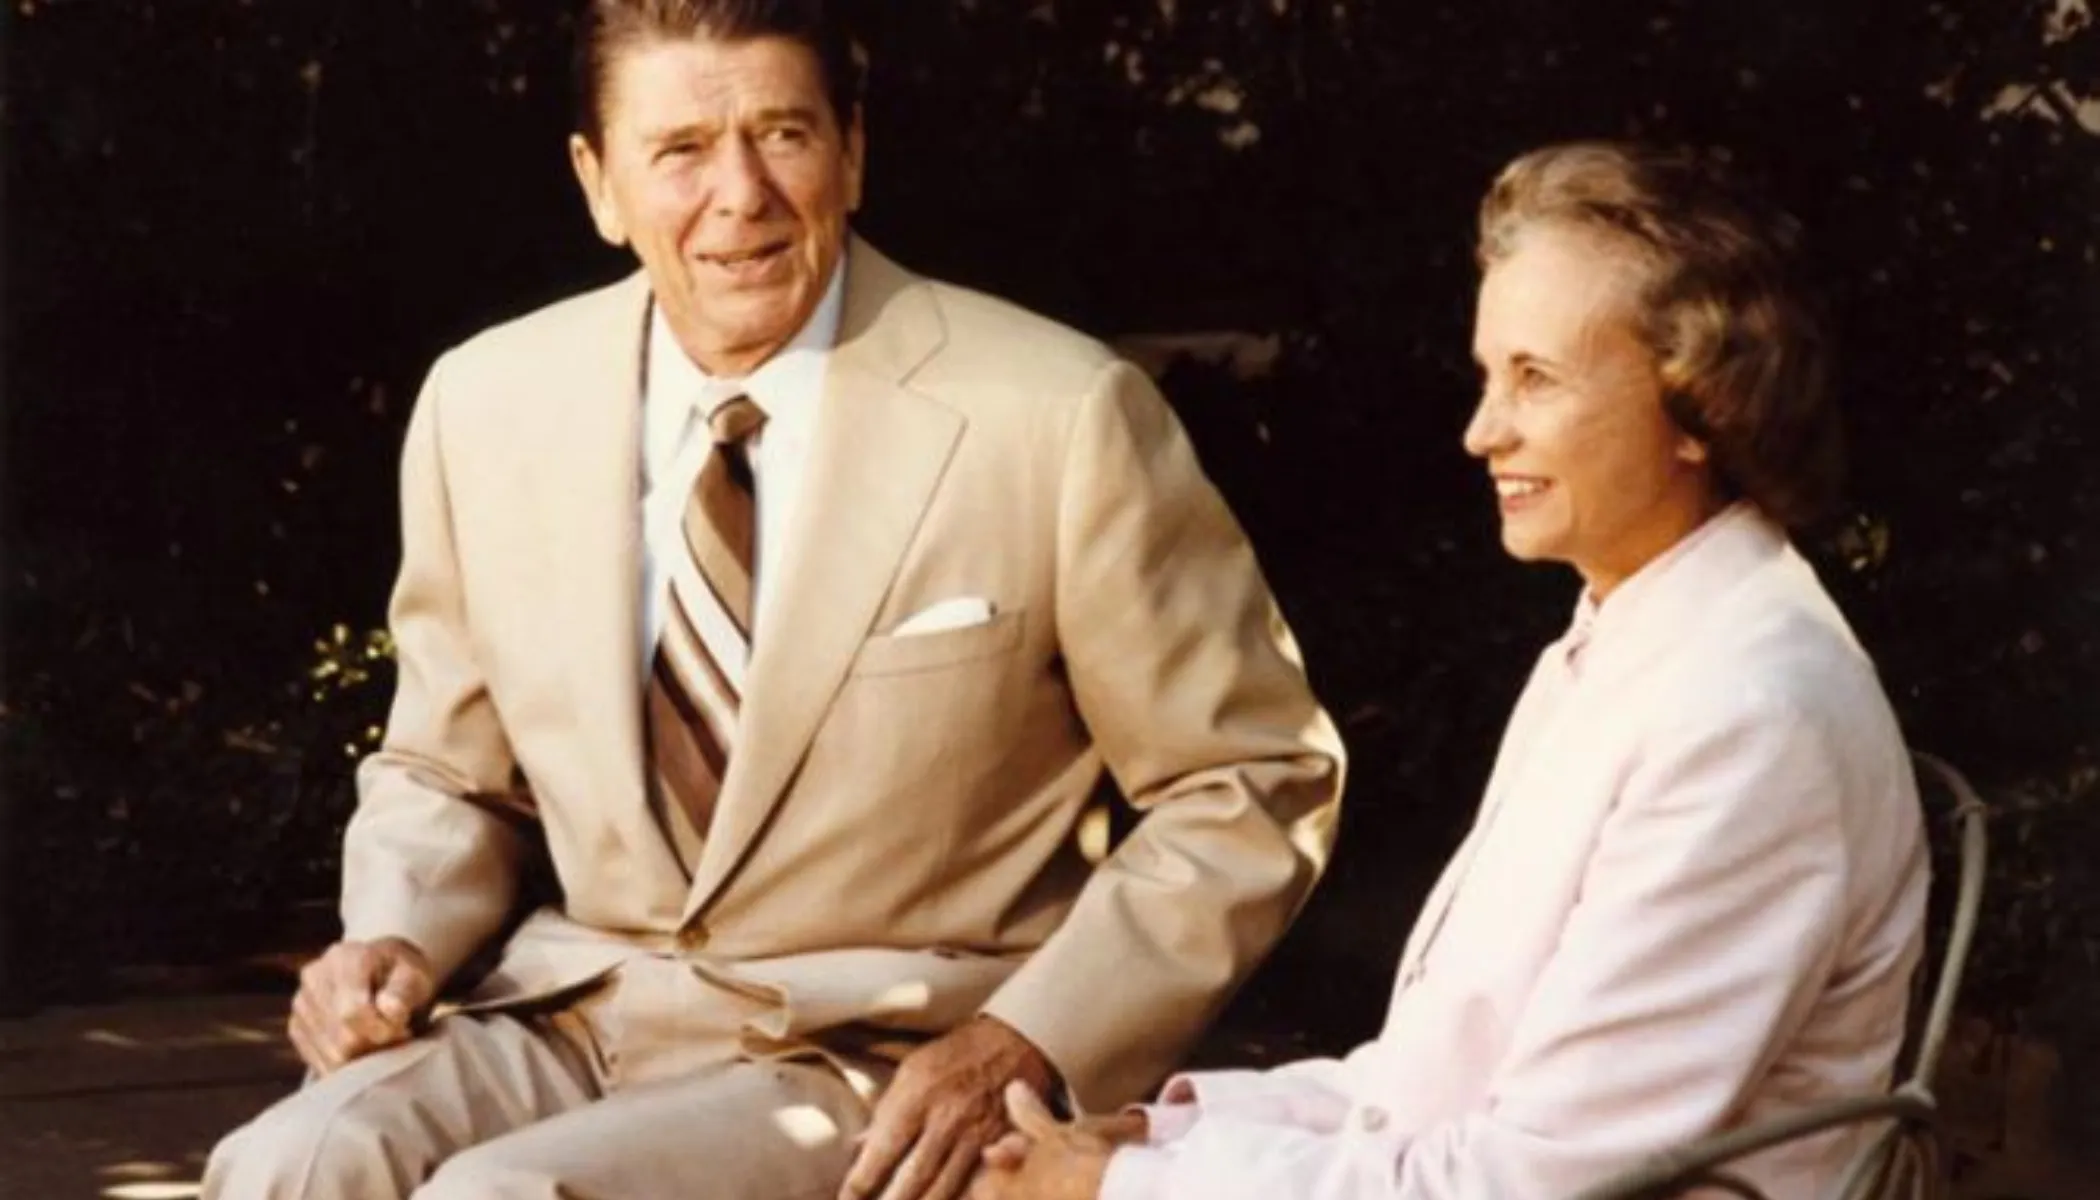 President Ronald Reagan and his Supreme Court justice nominee Sandra Day O'Connor on July 15, 1981.?w=200&h=150